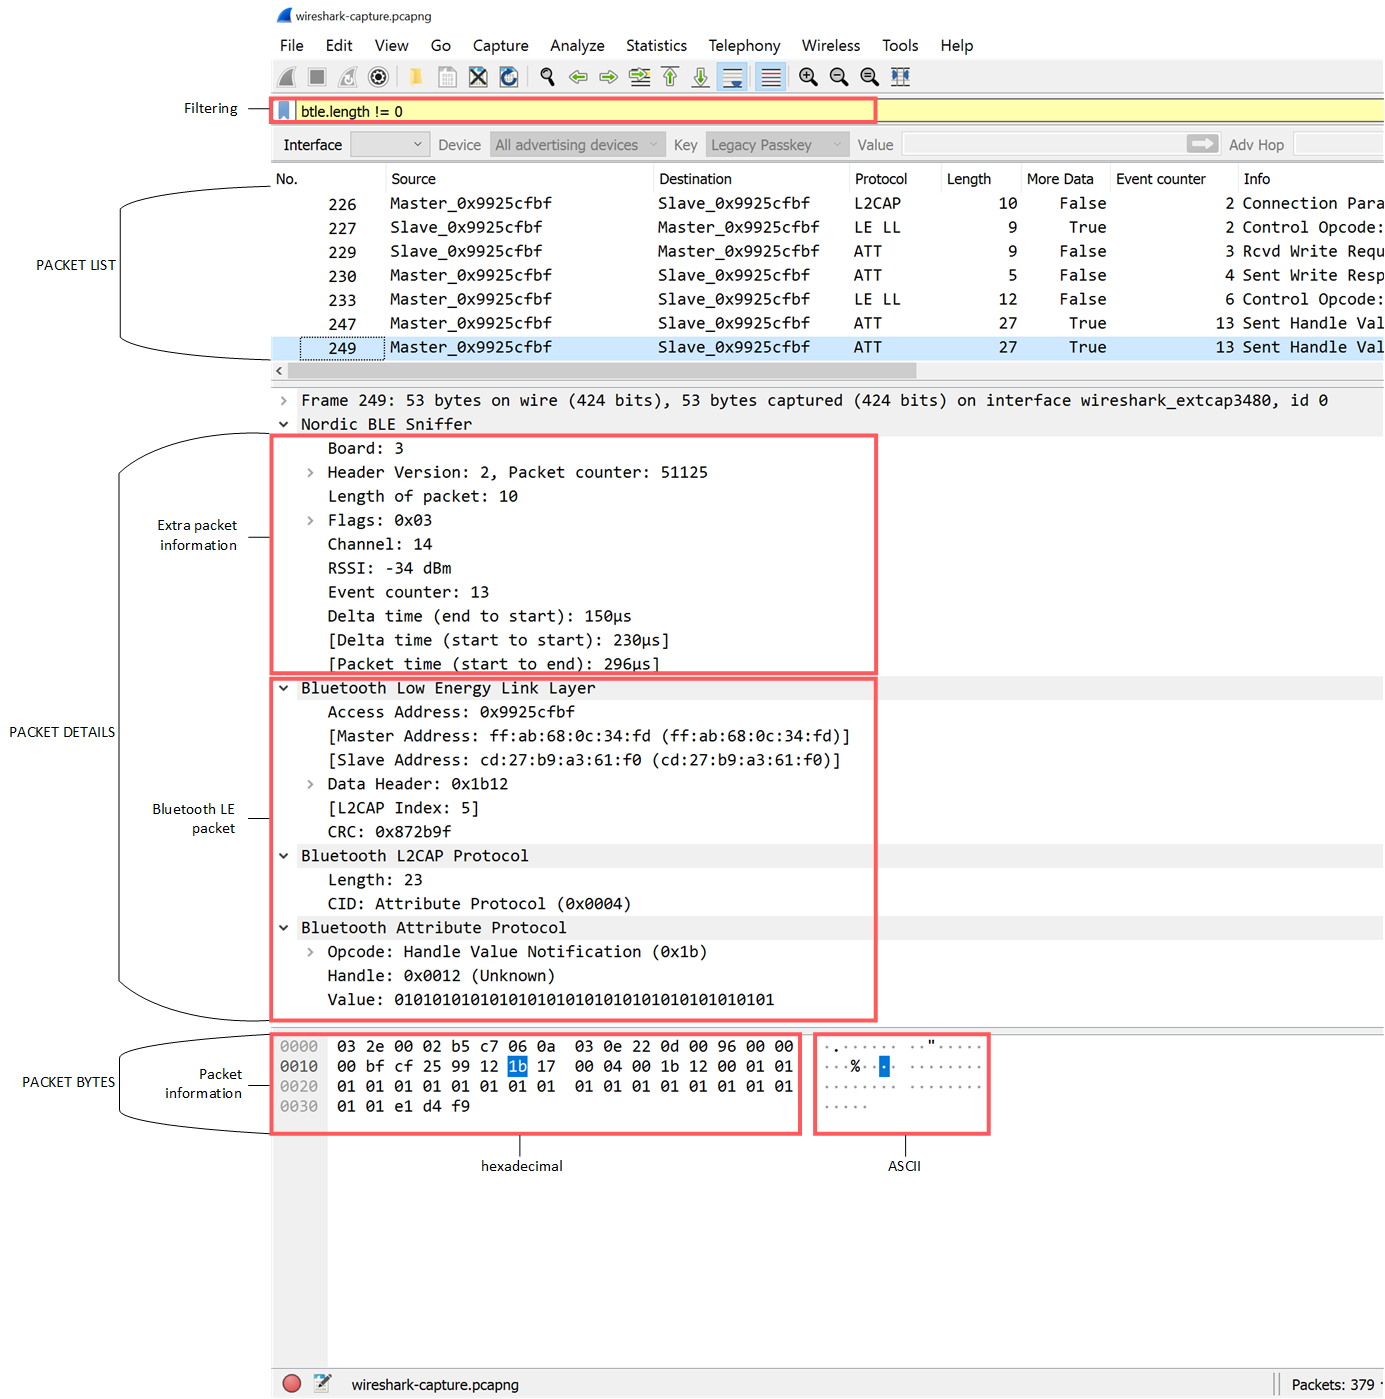 Screenshot showing the different parts of the Wireshark interface